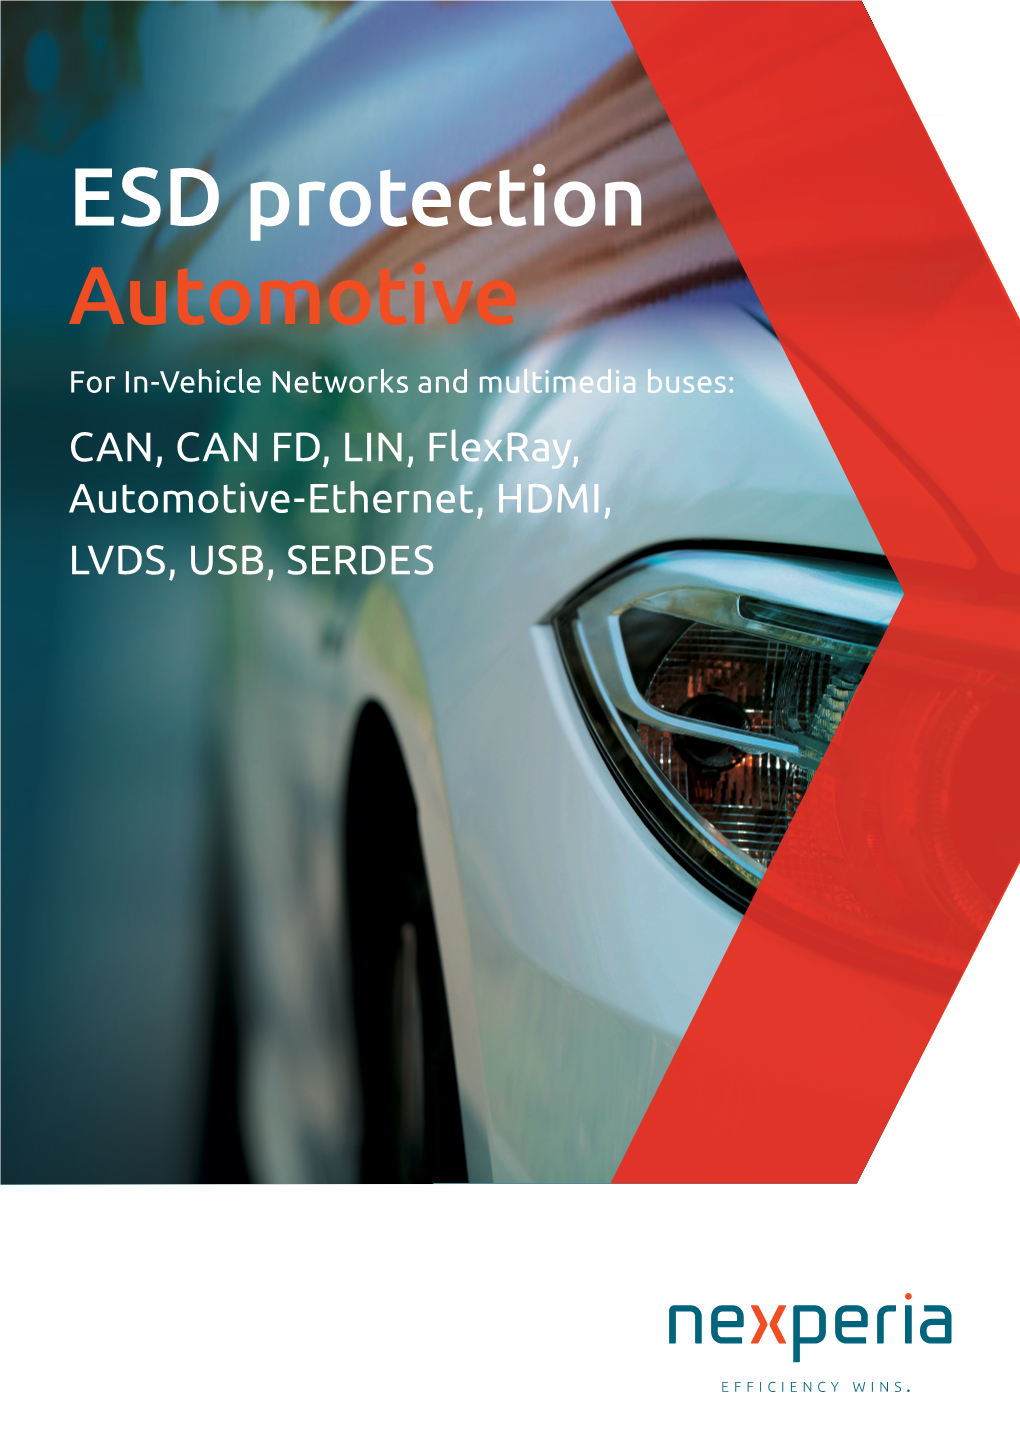 ESD Protection Automotive for In-Vehicle Networks and Multimedia Buses: CAN, CAN FD, LIN, Flexray, Automotive-Ethernet, HDMI, LVDS, USB, SERDES Contents